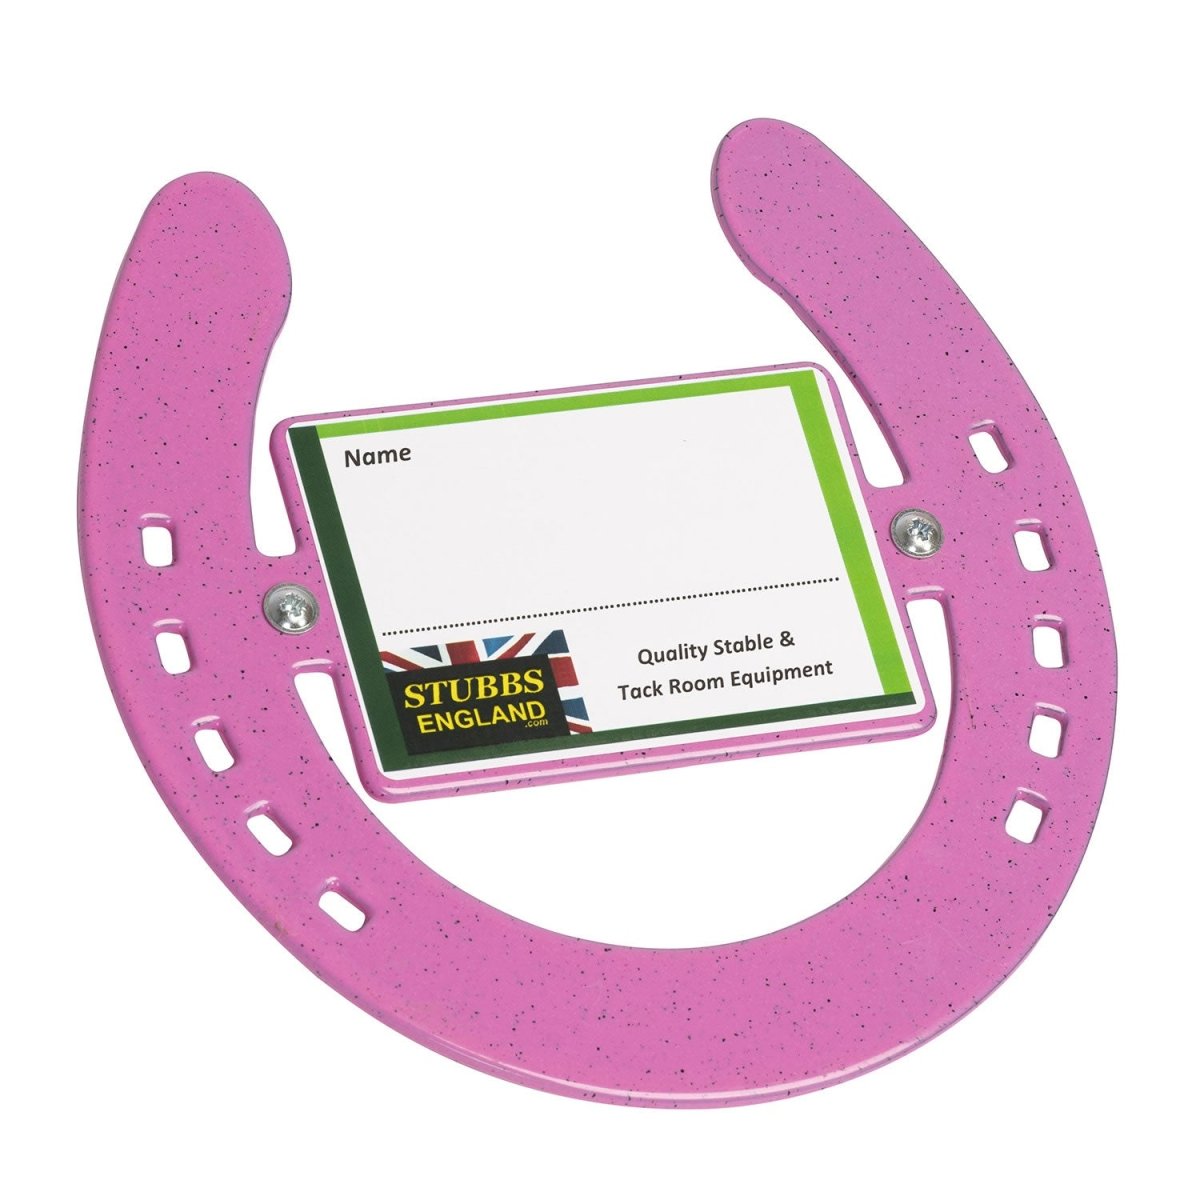 Stubbs Horseshoe With Name Plate - Pink -